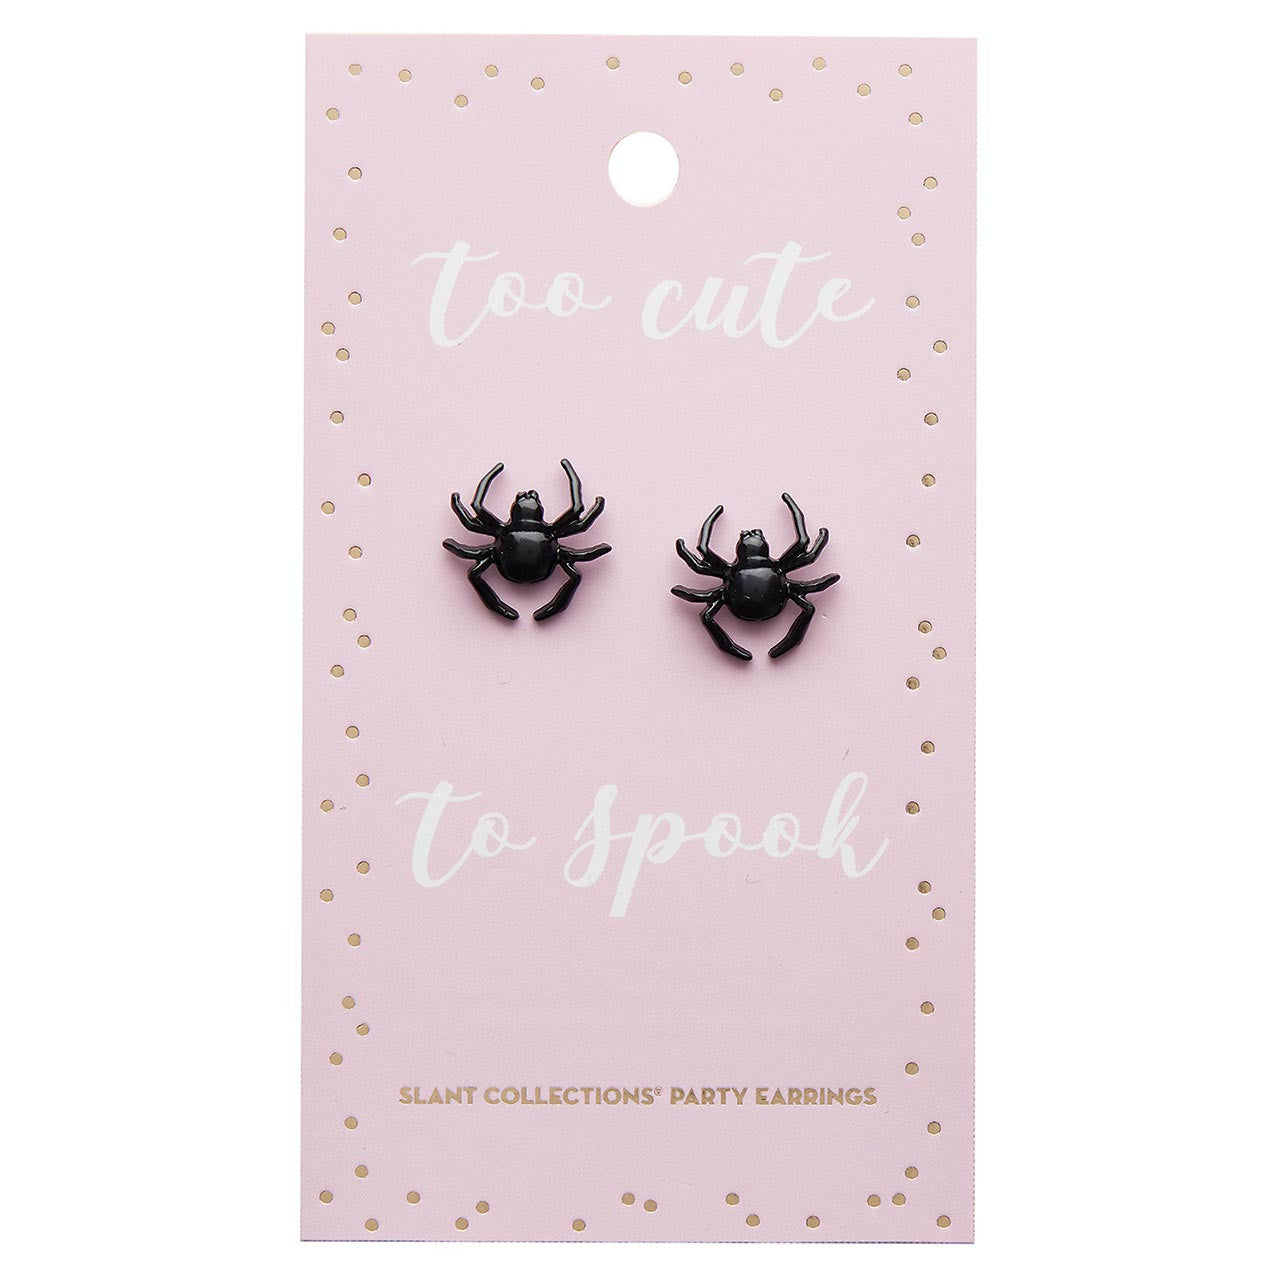 Too Cute to Spook Spider Earrings | Black Studs for Halloween, Spooky, Goth